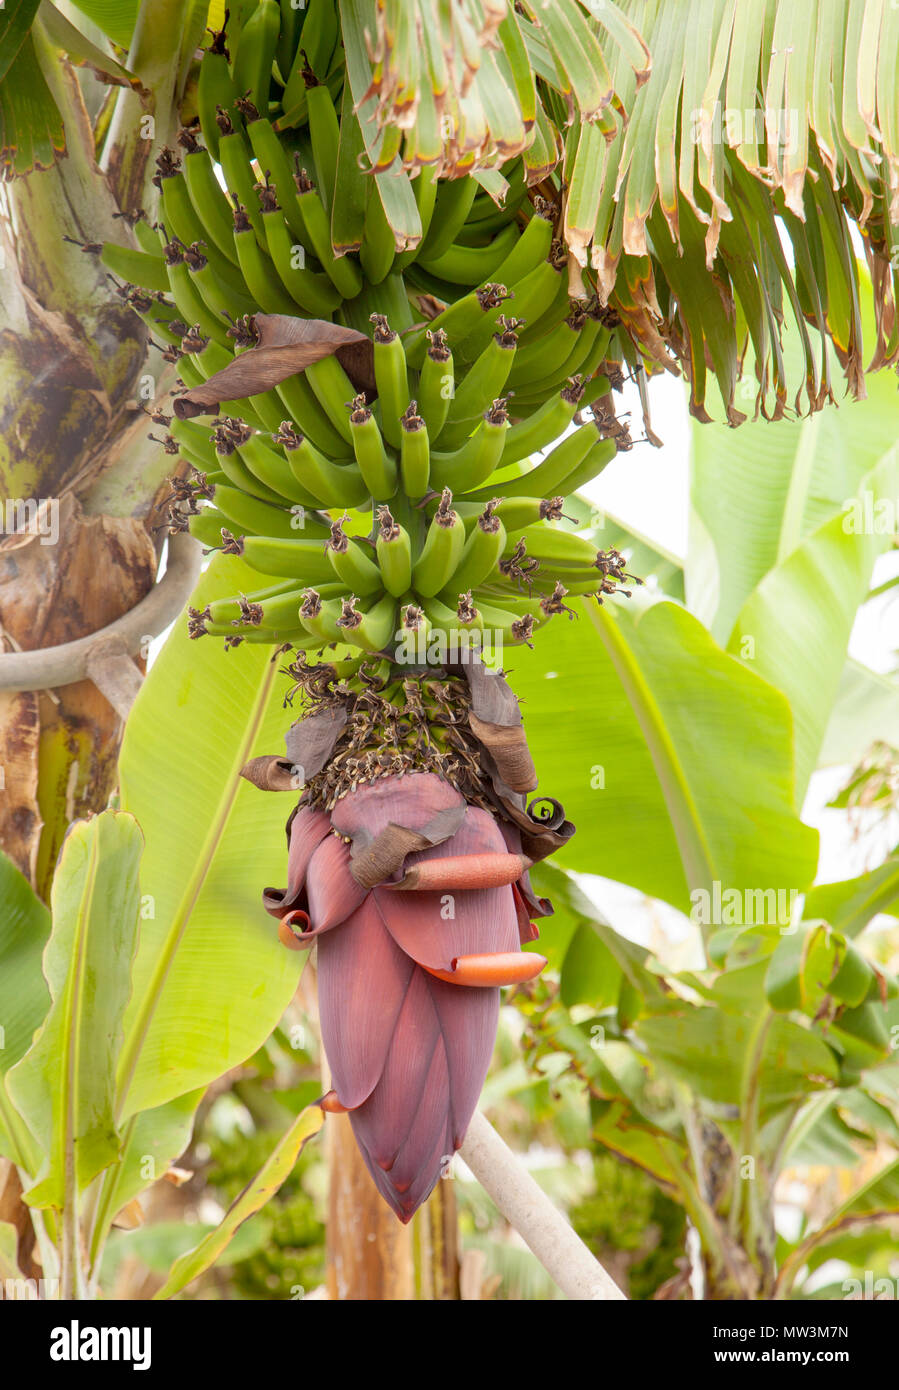 ripening cluster of green banana natura floral background Stock Photo